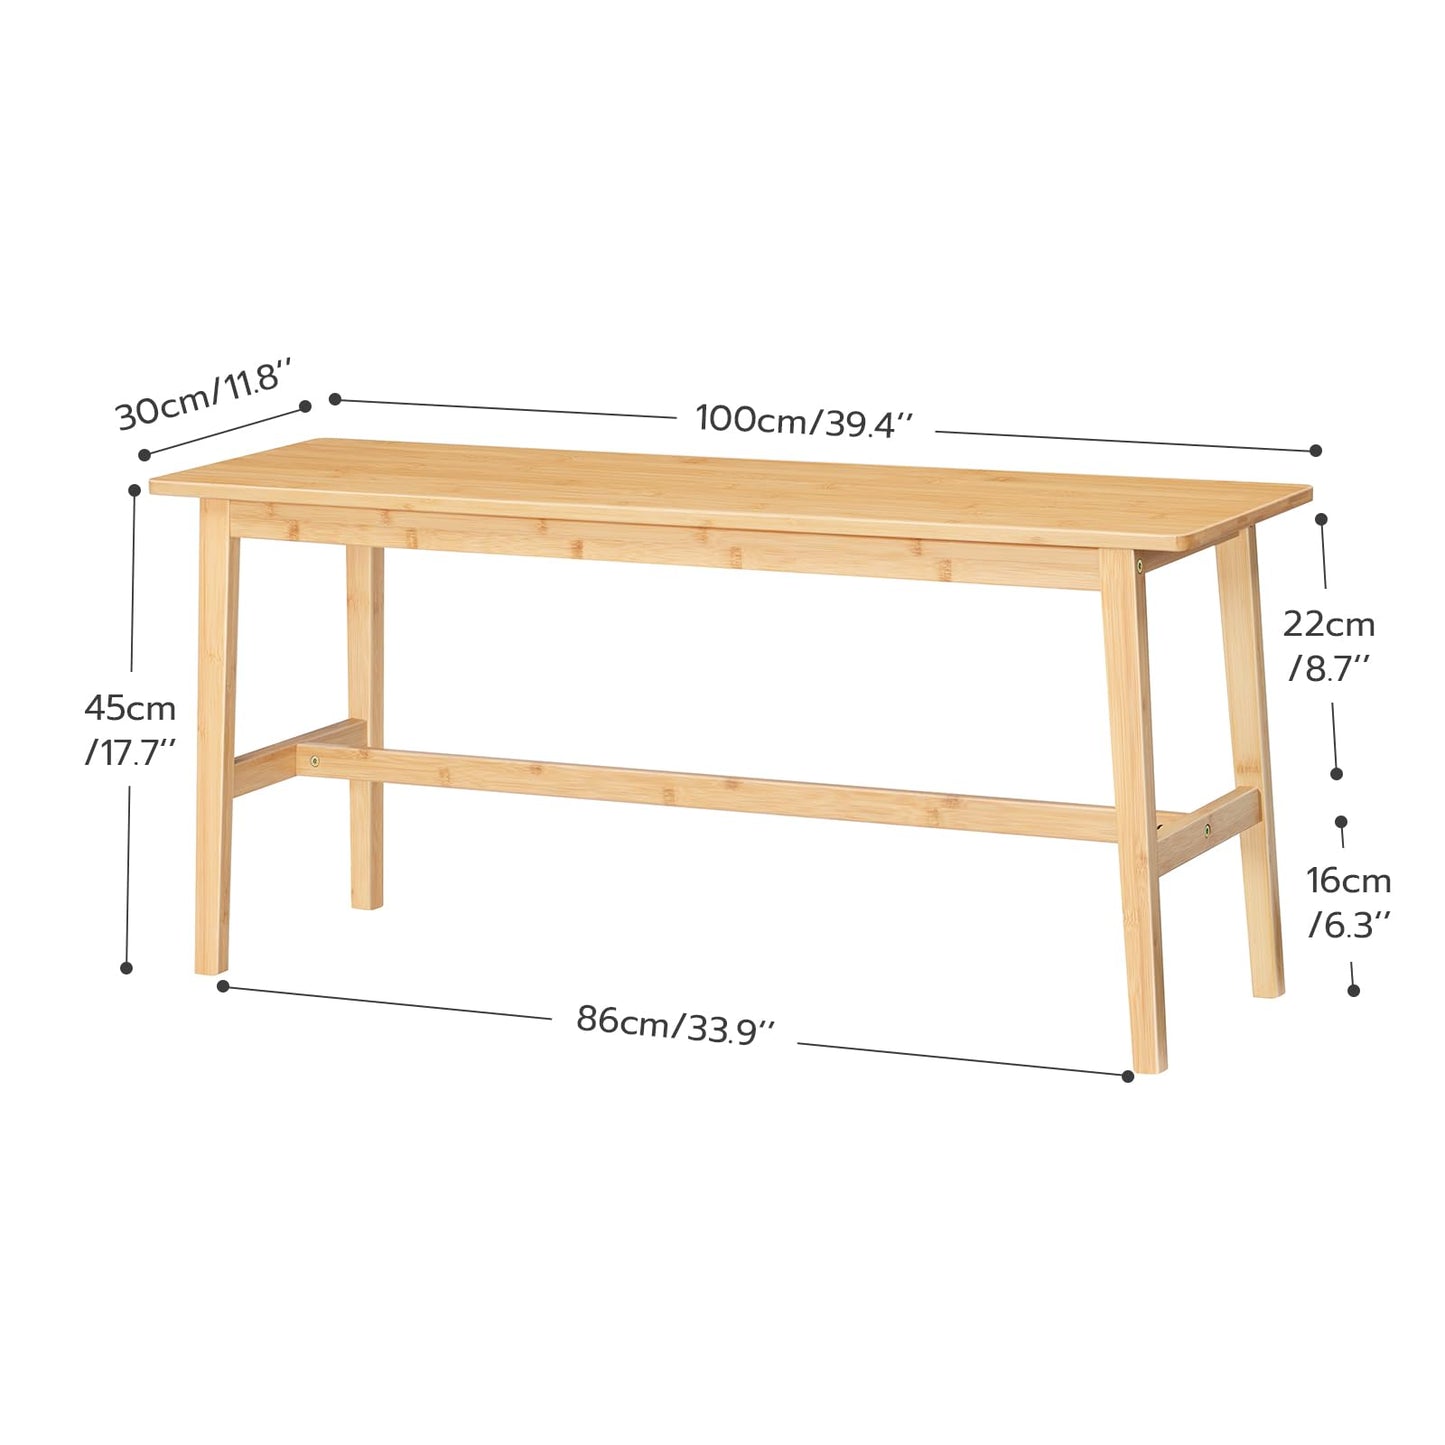 HOOBRO Bamboo Dining Bench, Table Bench, Entryway Bench, Kitchen Bench, Shoe Changing Bench, for Kitchen, Dining Room, Living Room, Bedroom, Easy to